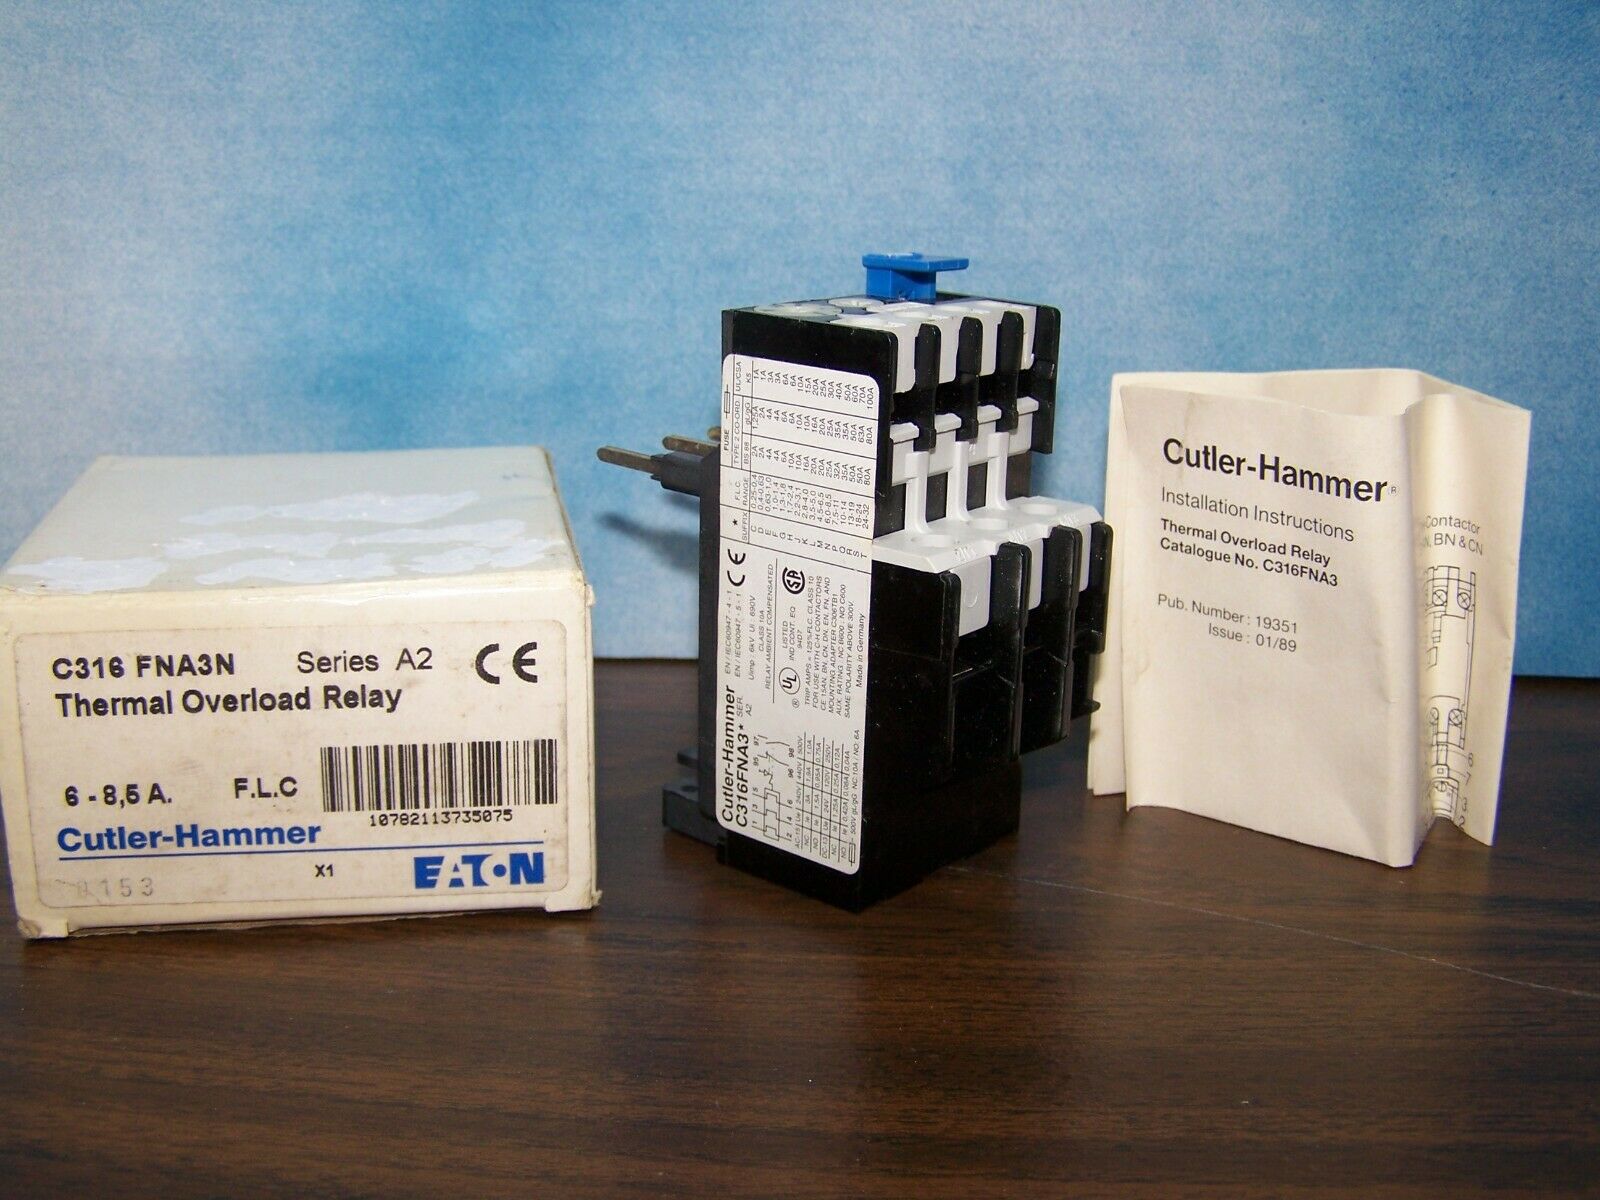 Cutler-hammer Eaton C316 Fna3n series A2  Thermal Overload Relay 6-8, 5a.  Nos